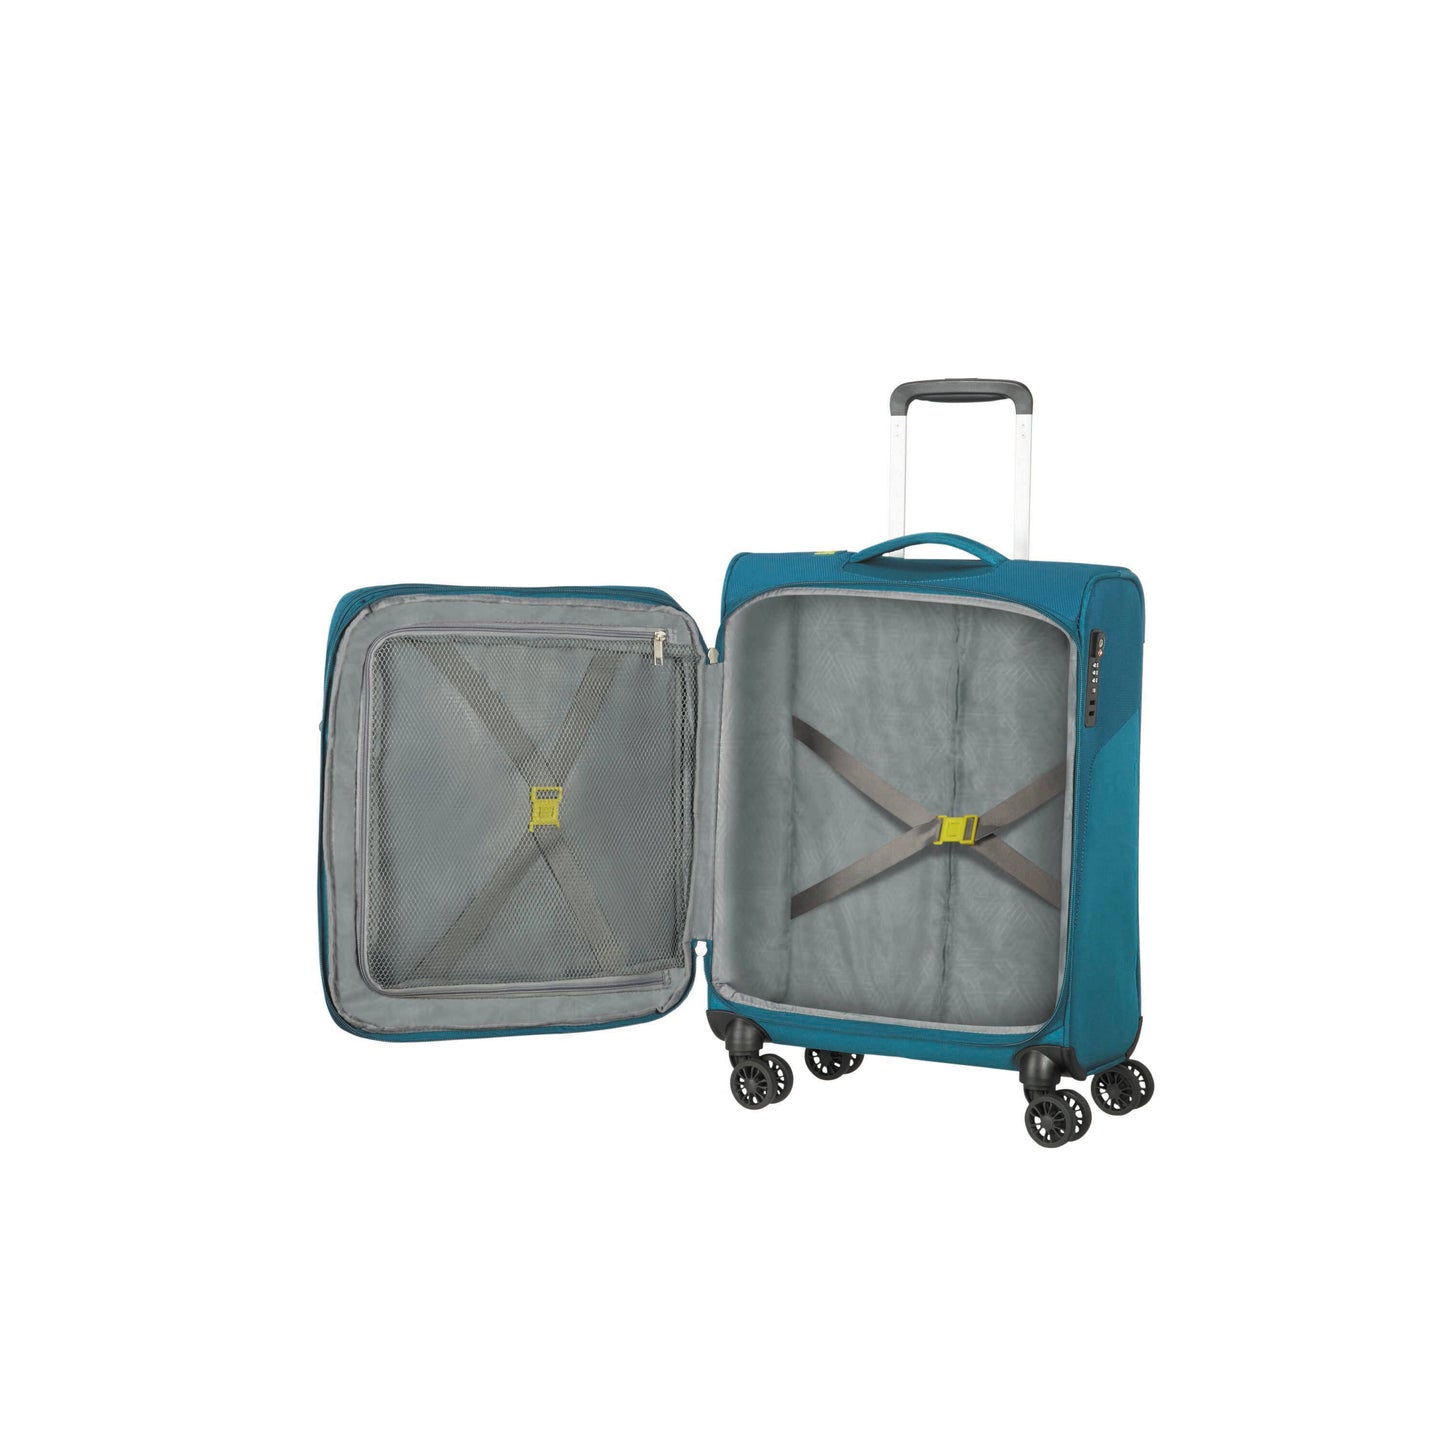 American Tourister Fly Light Spinner Suitcases